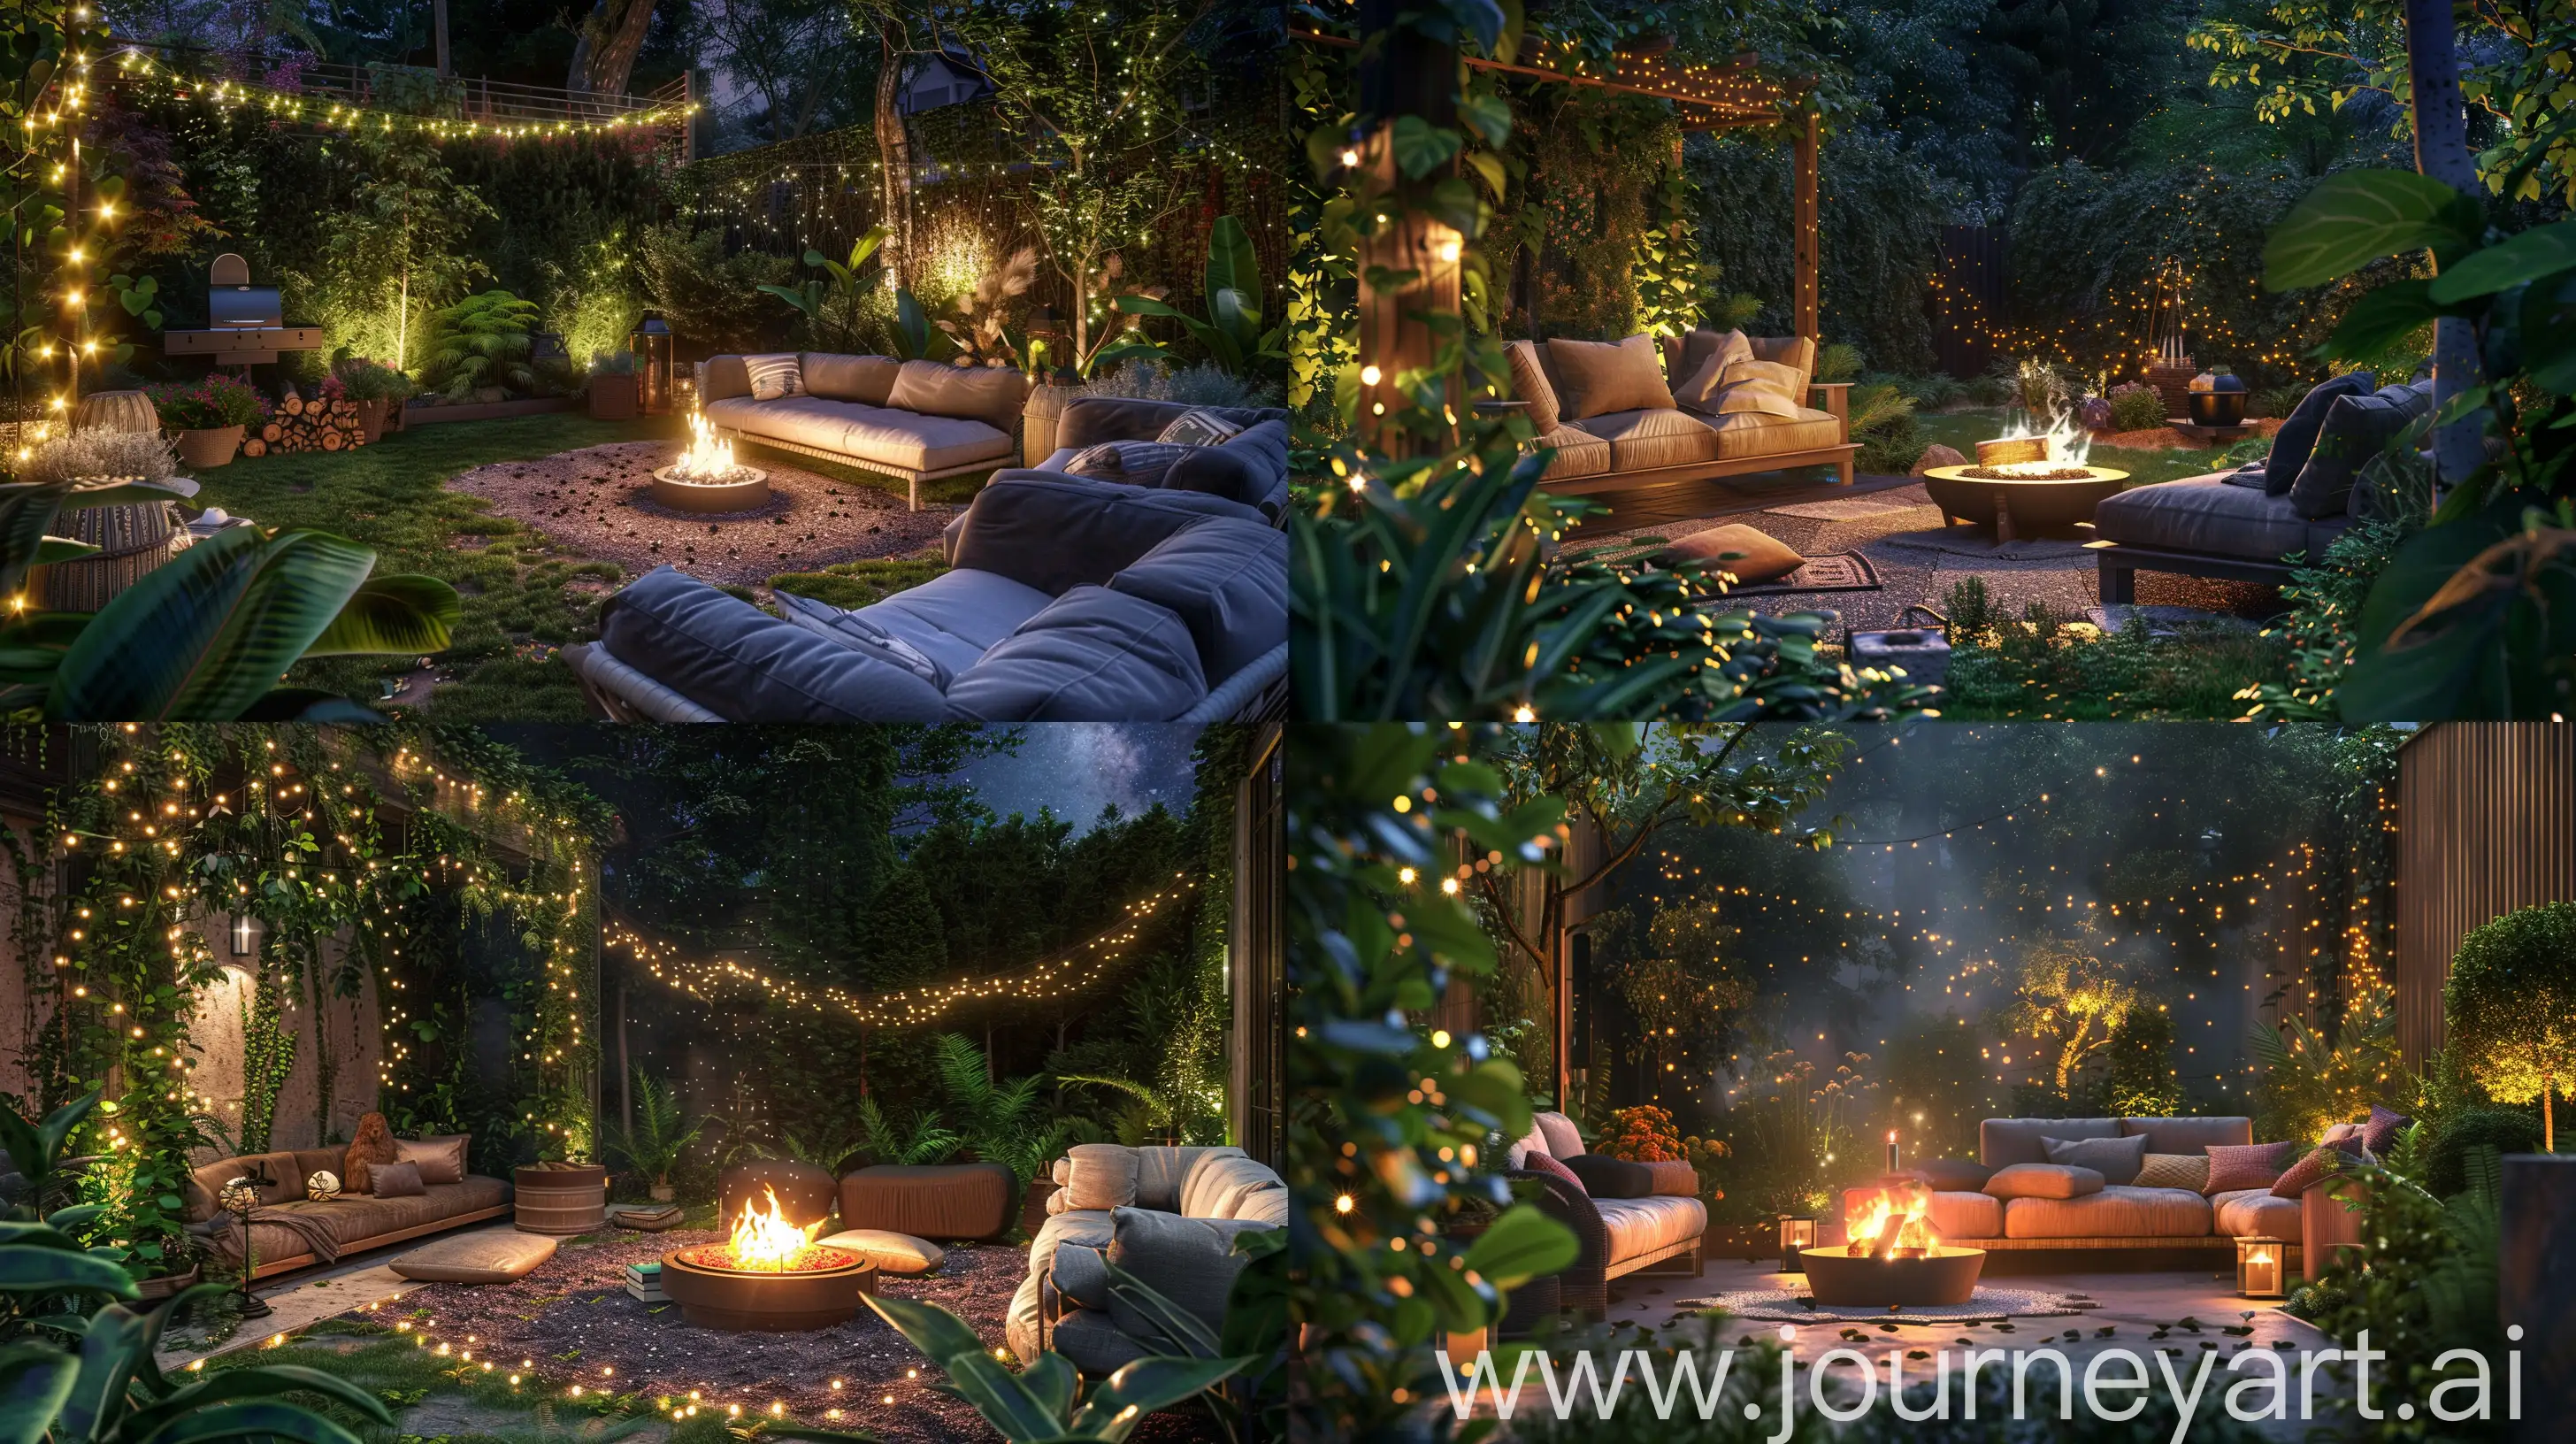 Step into an outdoor oasis in the backyard, where a cozy patio lounge beckons with plush seating and a crackling fire pit. Lush greenery surrounds the space, with twinkling fairy lights casting a warm glow under the starry night sky. --ar 16:9